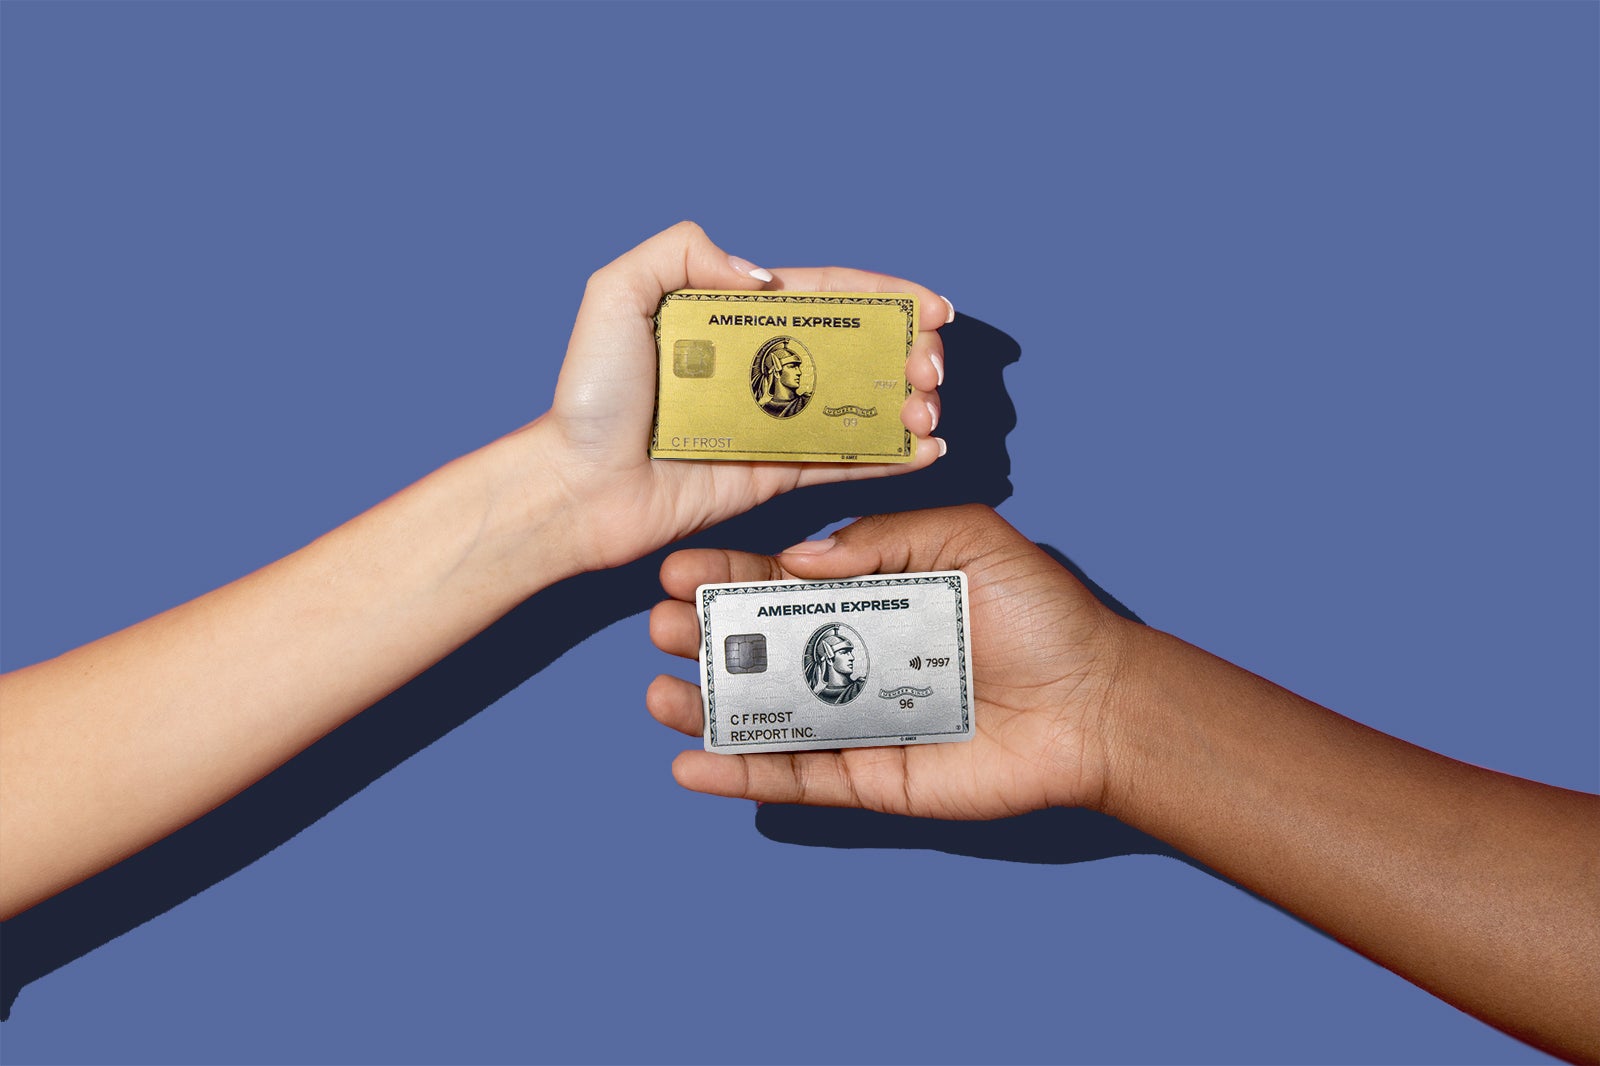 2 hands hold the Amex Gold and Amex Platinum cards